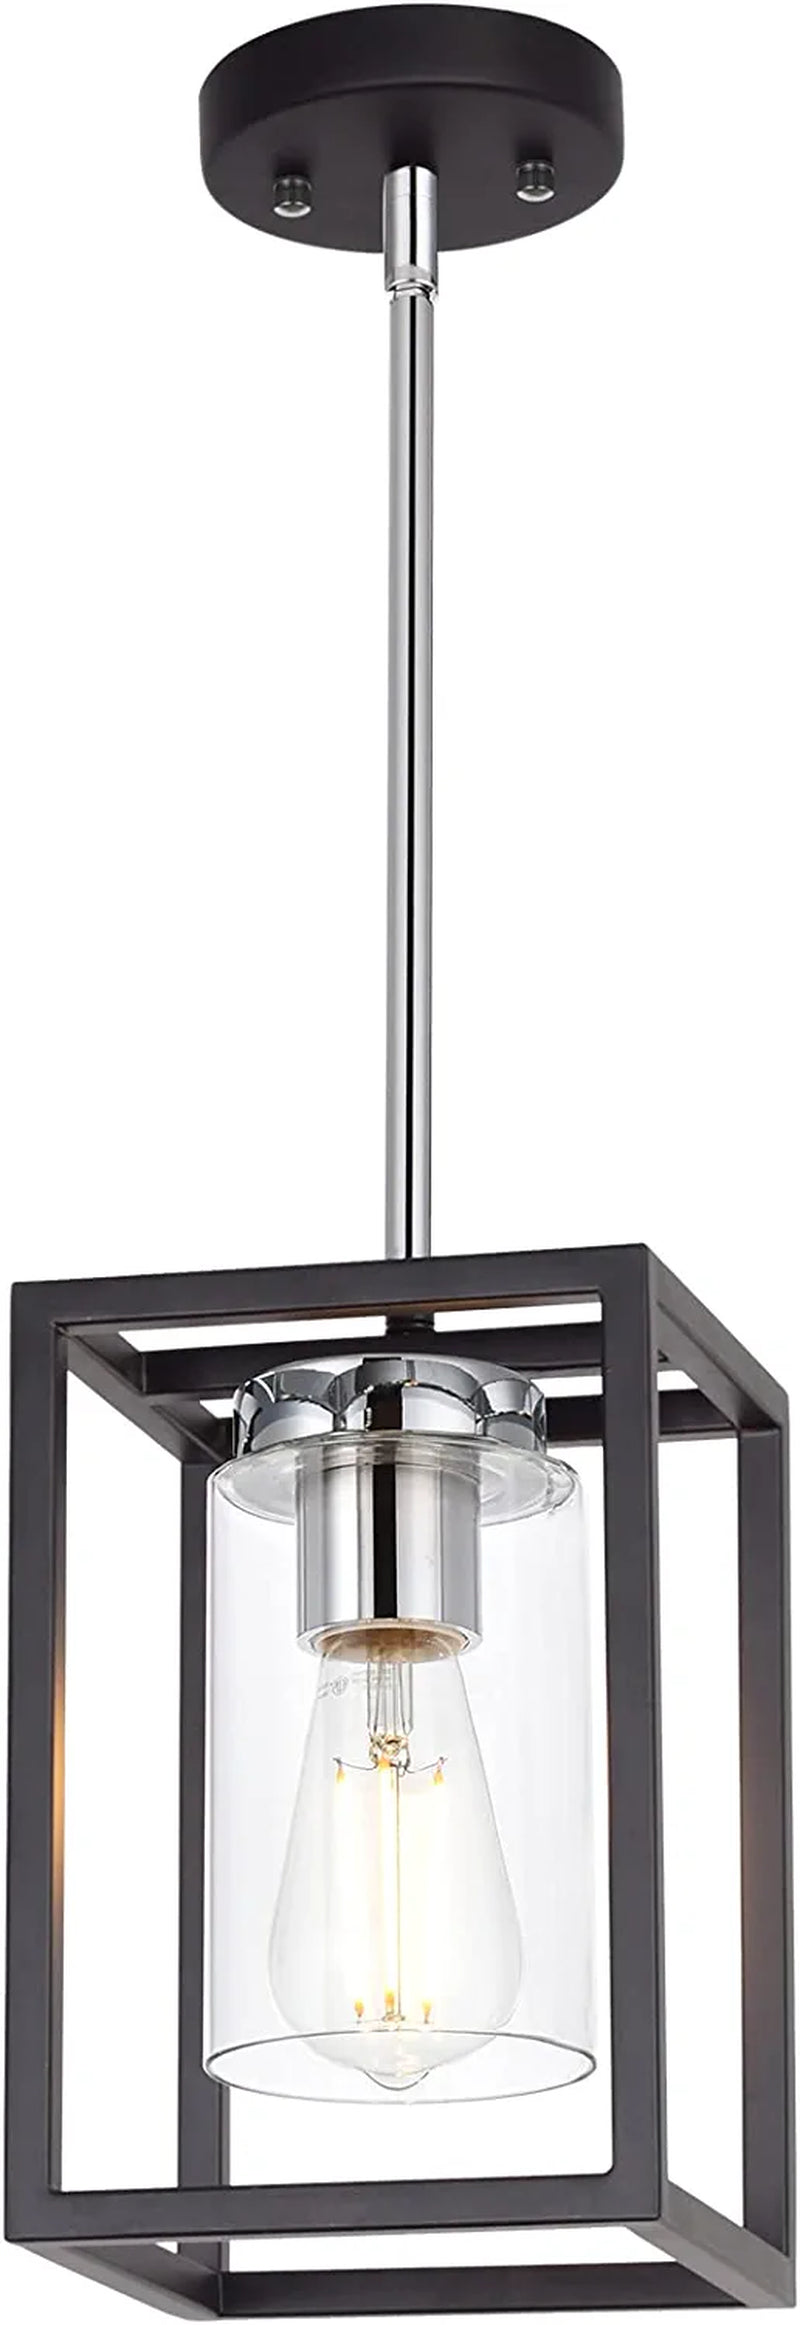 VINLUZ Single 1 Light Black and Brushed Nickel Modern Glass Pendant Light Industrial Modern Metal Chandelier with Clear Glass Shade for Dining Room Kitchen Island Foyer Cafe Home & Garden > Lighting > Lighting Fixtures VINLUZ Black and Chrome 1 Light 